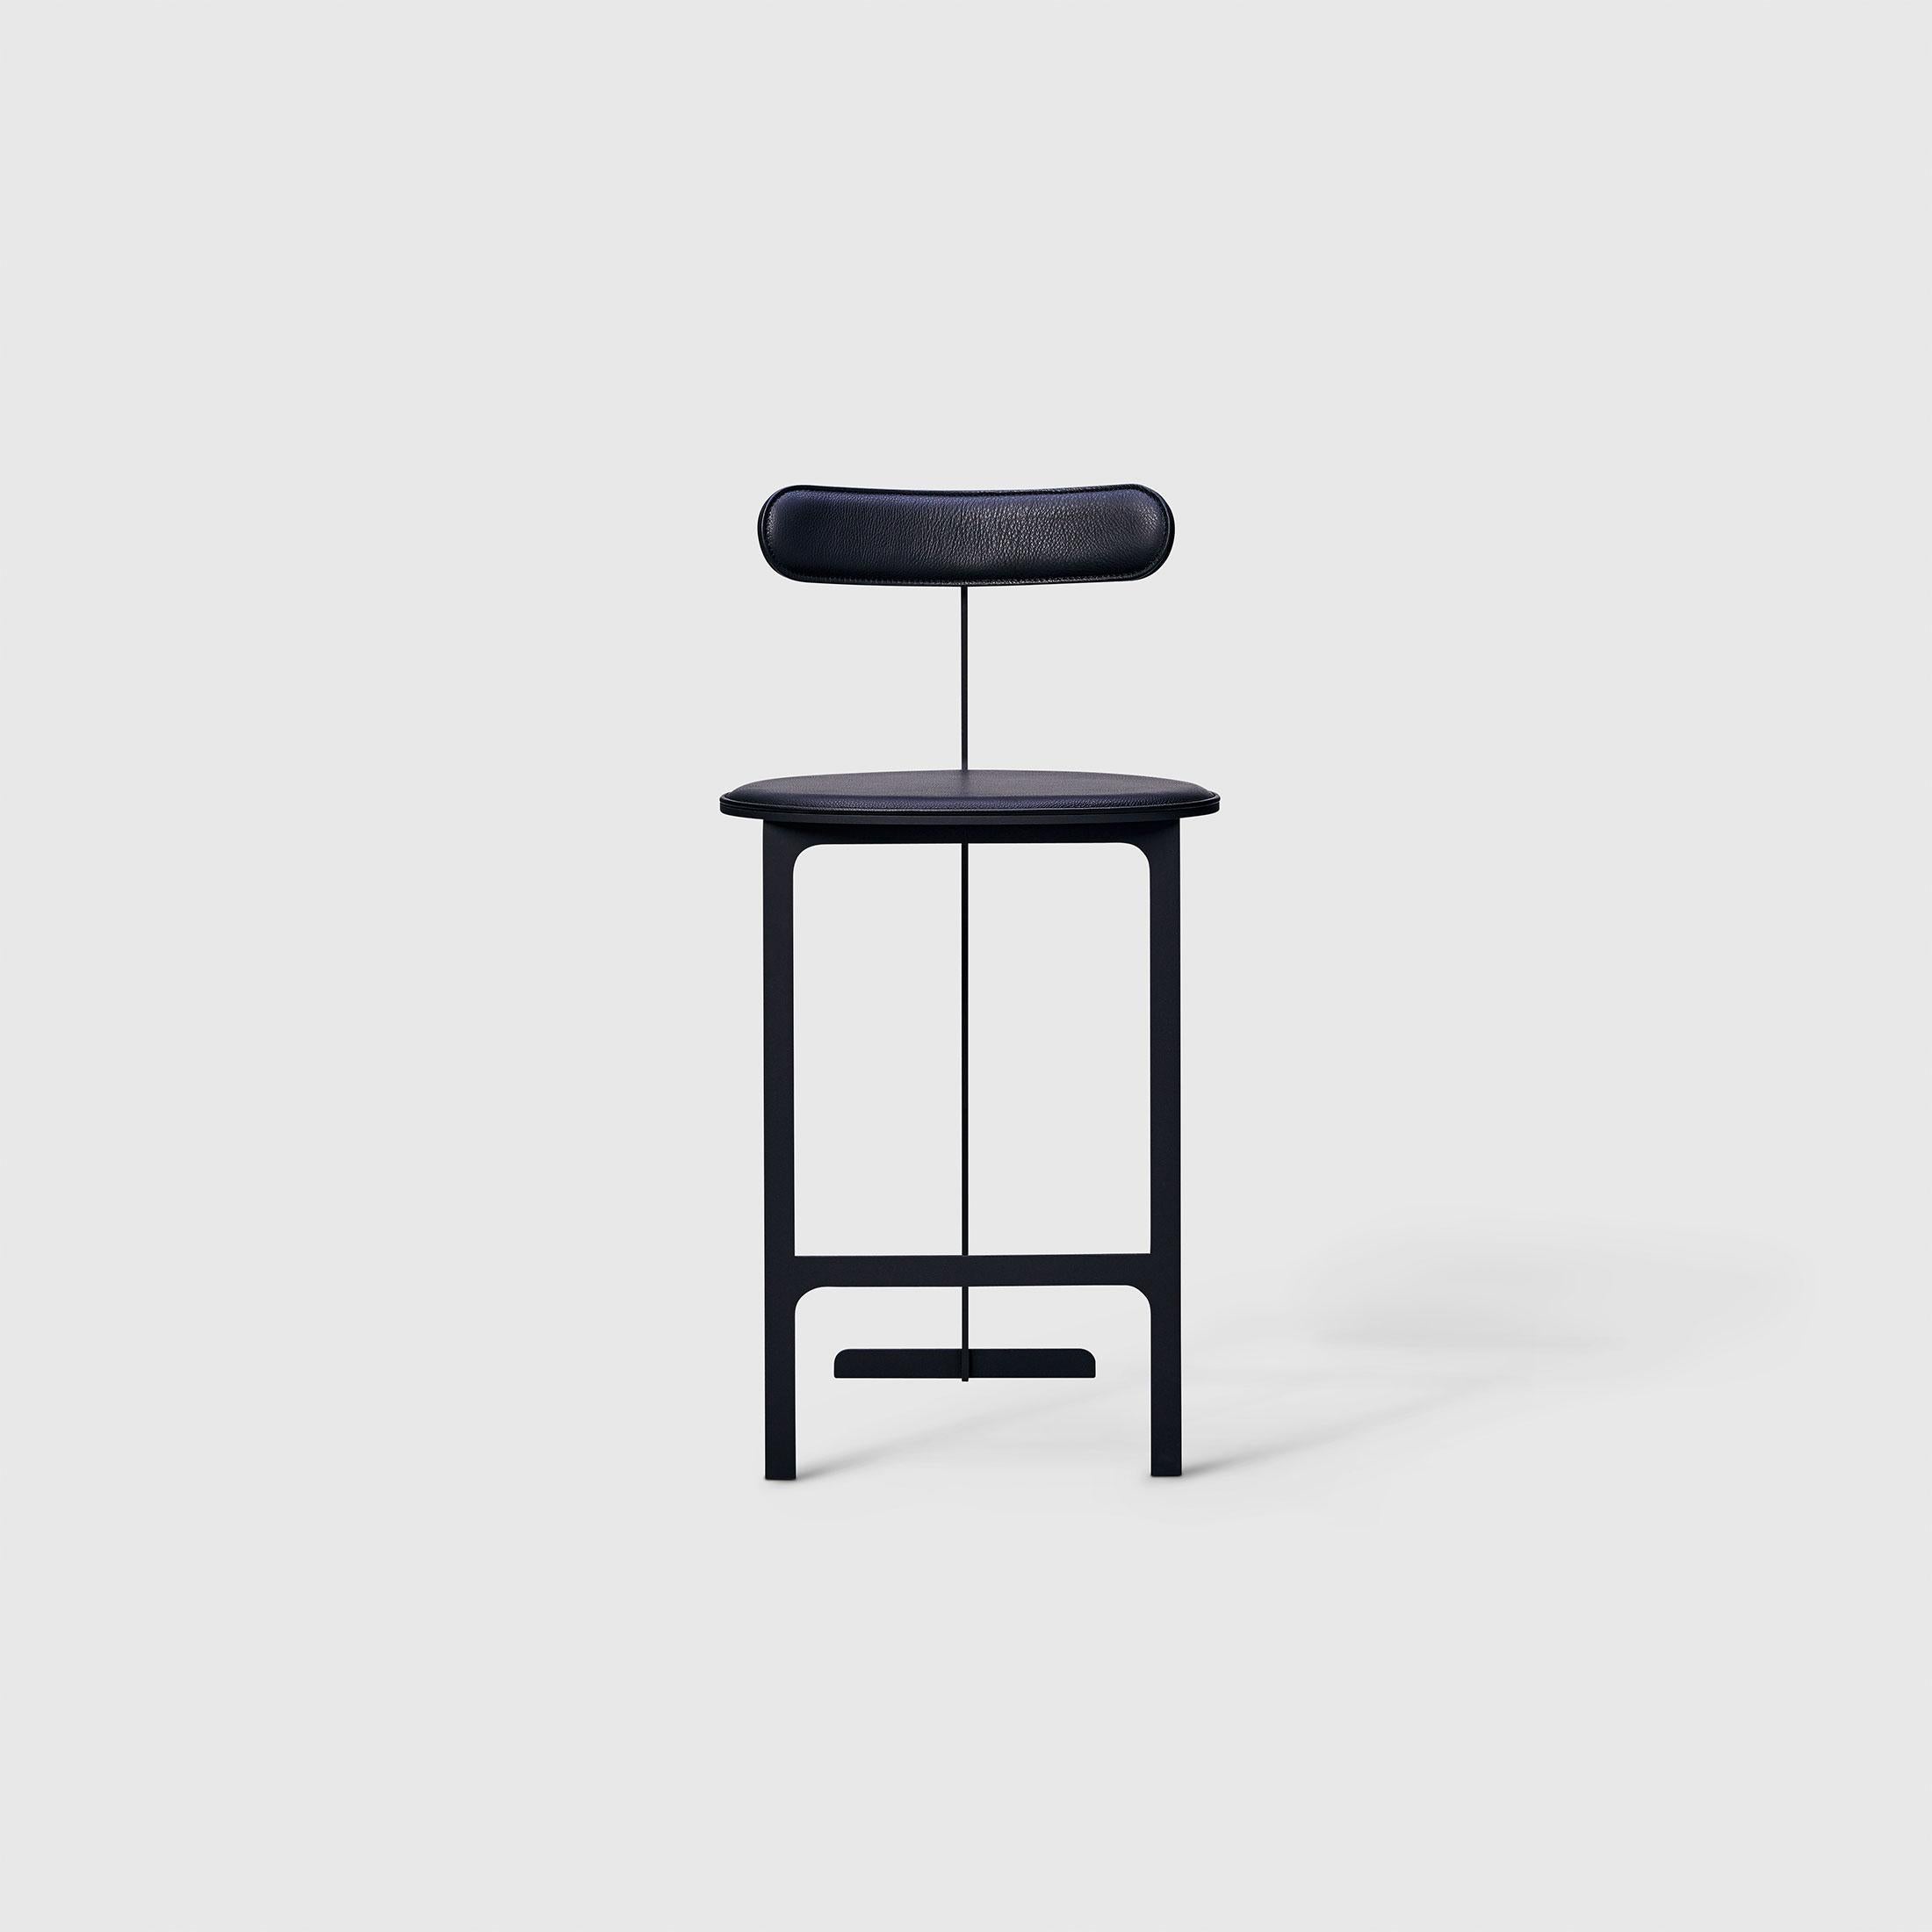 Park Place is in the heart of the most famous skyline in the world. The strong simple lines metal structure of the Park Place stools and chair by Yabu Pushelberg are reminiscent of the skyscrapers that tower above Manhattan.

Price listed is set